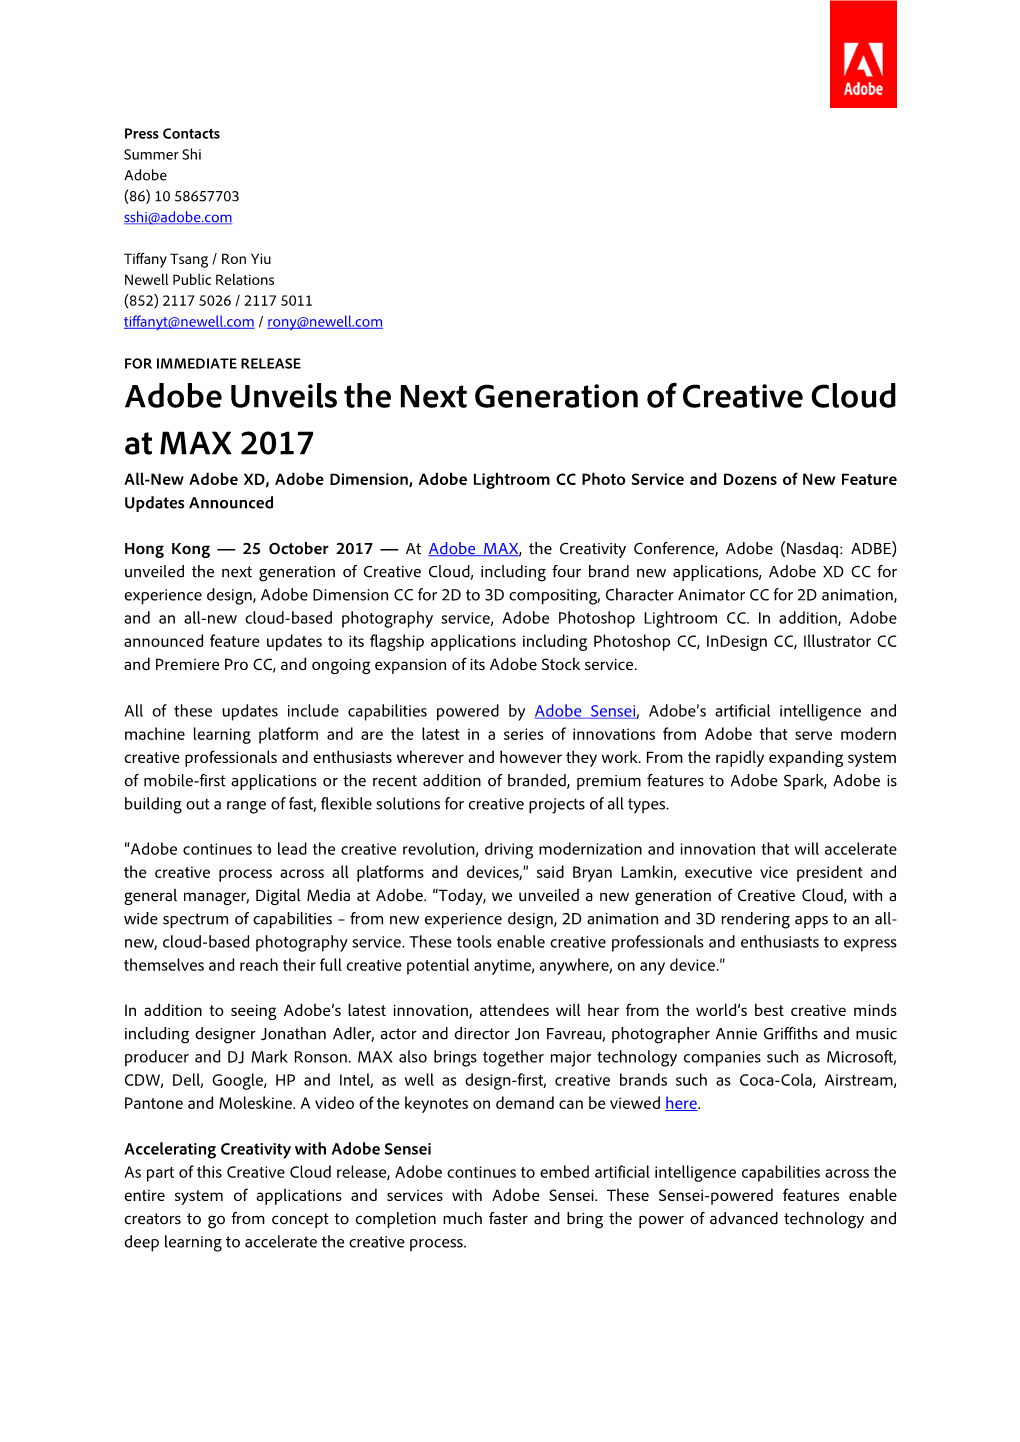 Adobe Unveils the Next Generation of Creative Cloud at MAX 2017